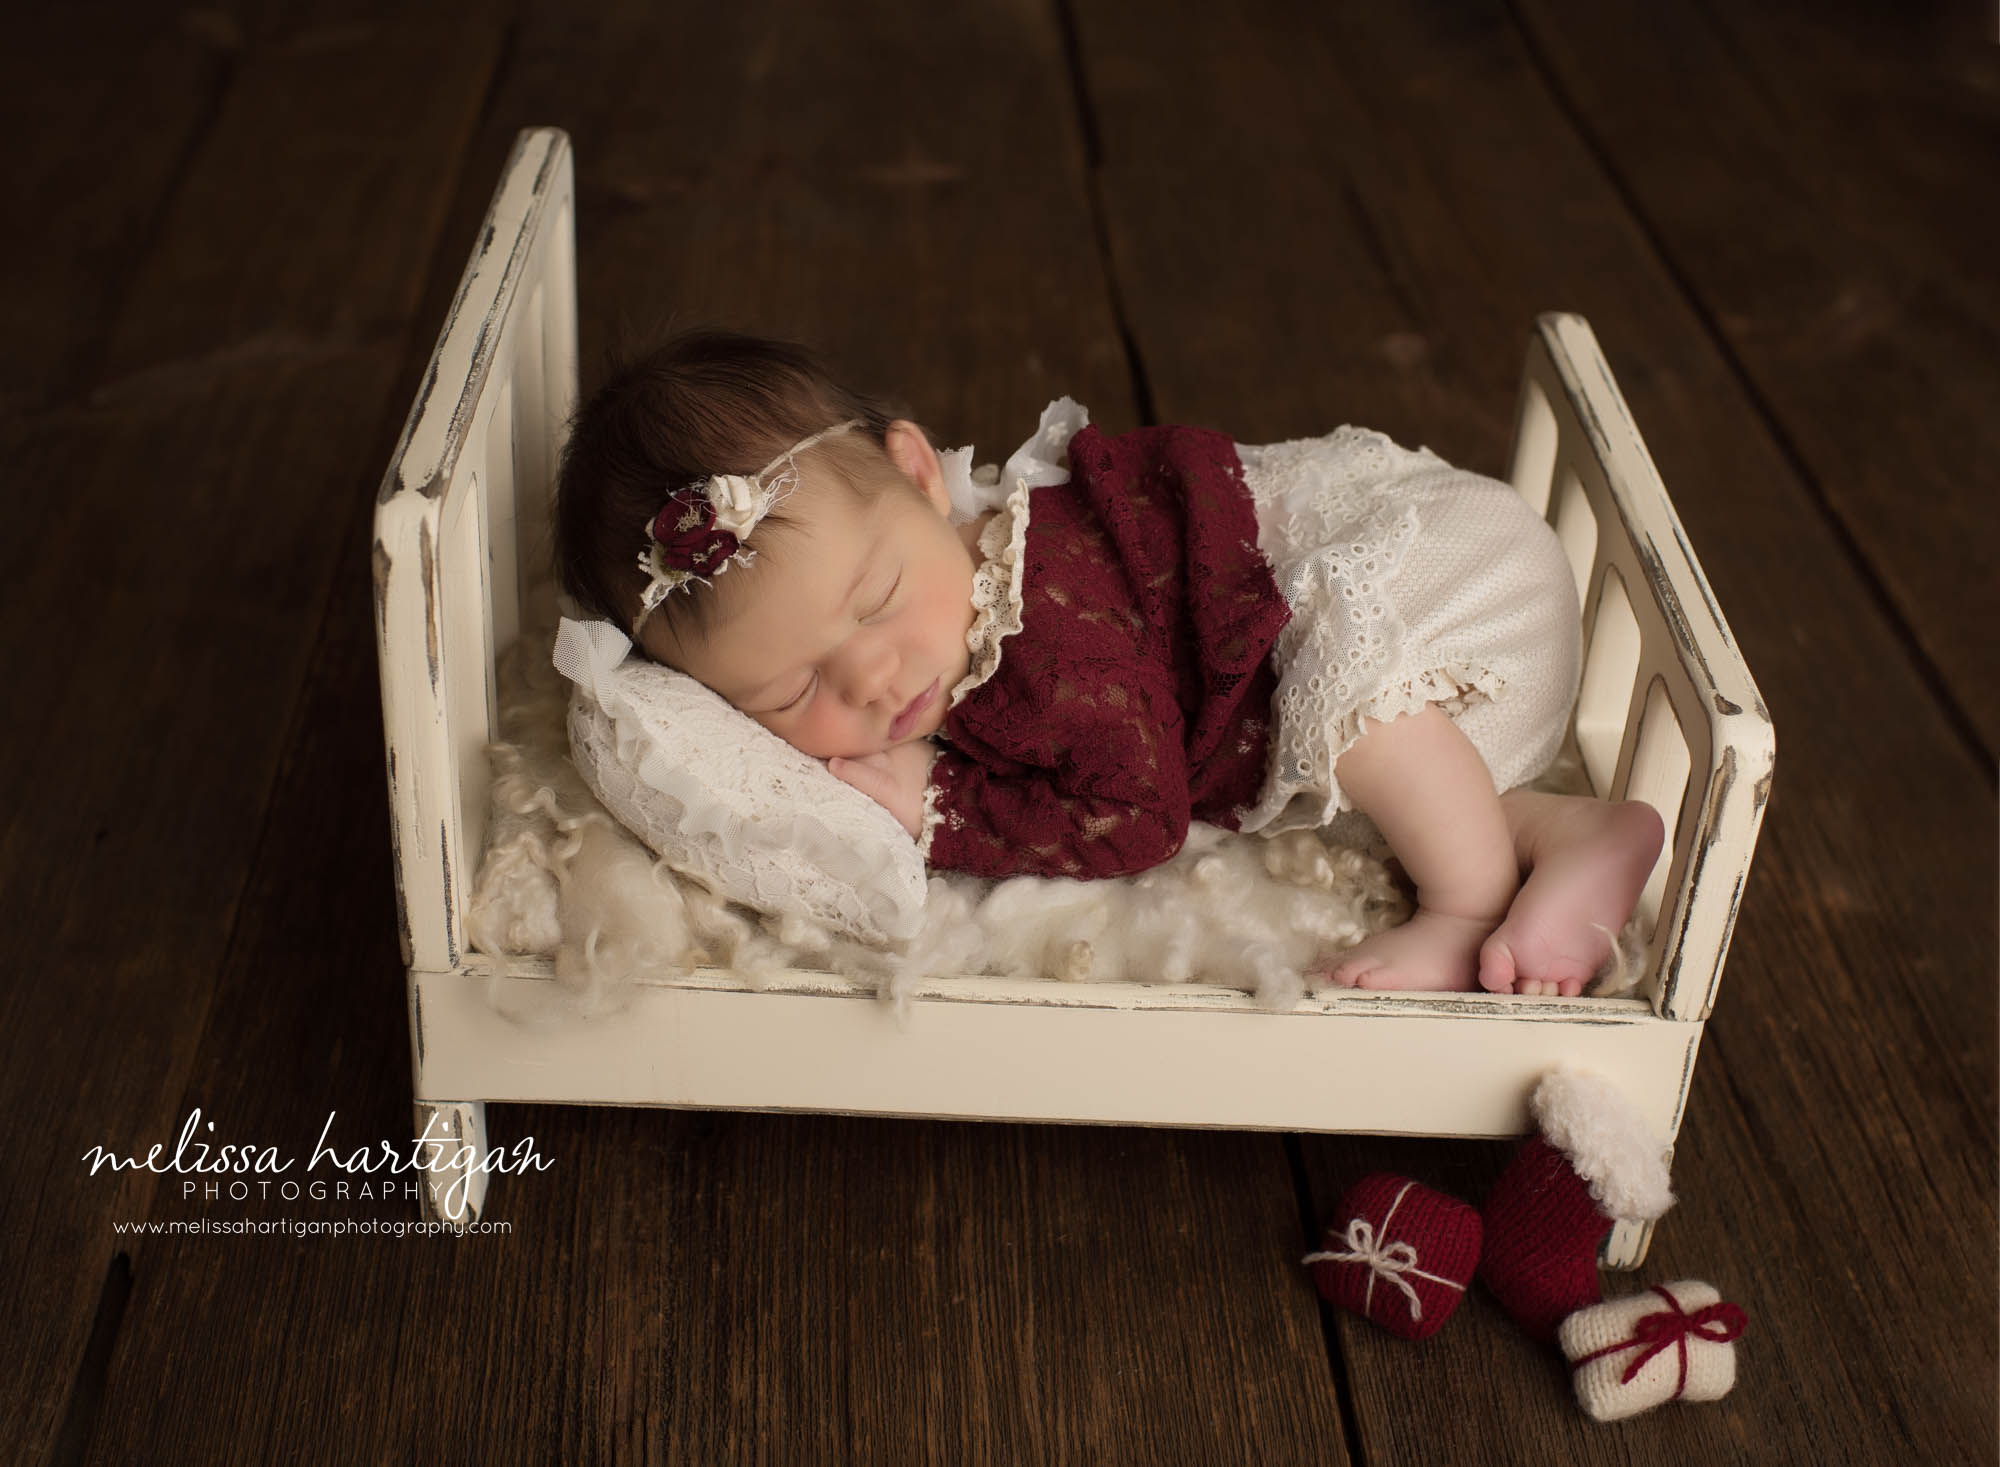 newborn baby girl posed on wooden newborn prop bed wearing red baby girl outfit for chirstmas newborn photography holiday set up